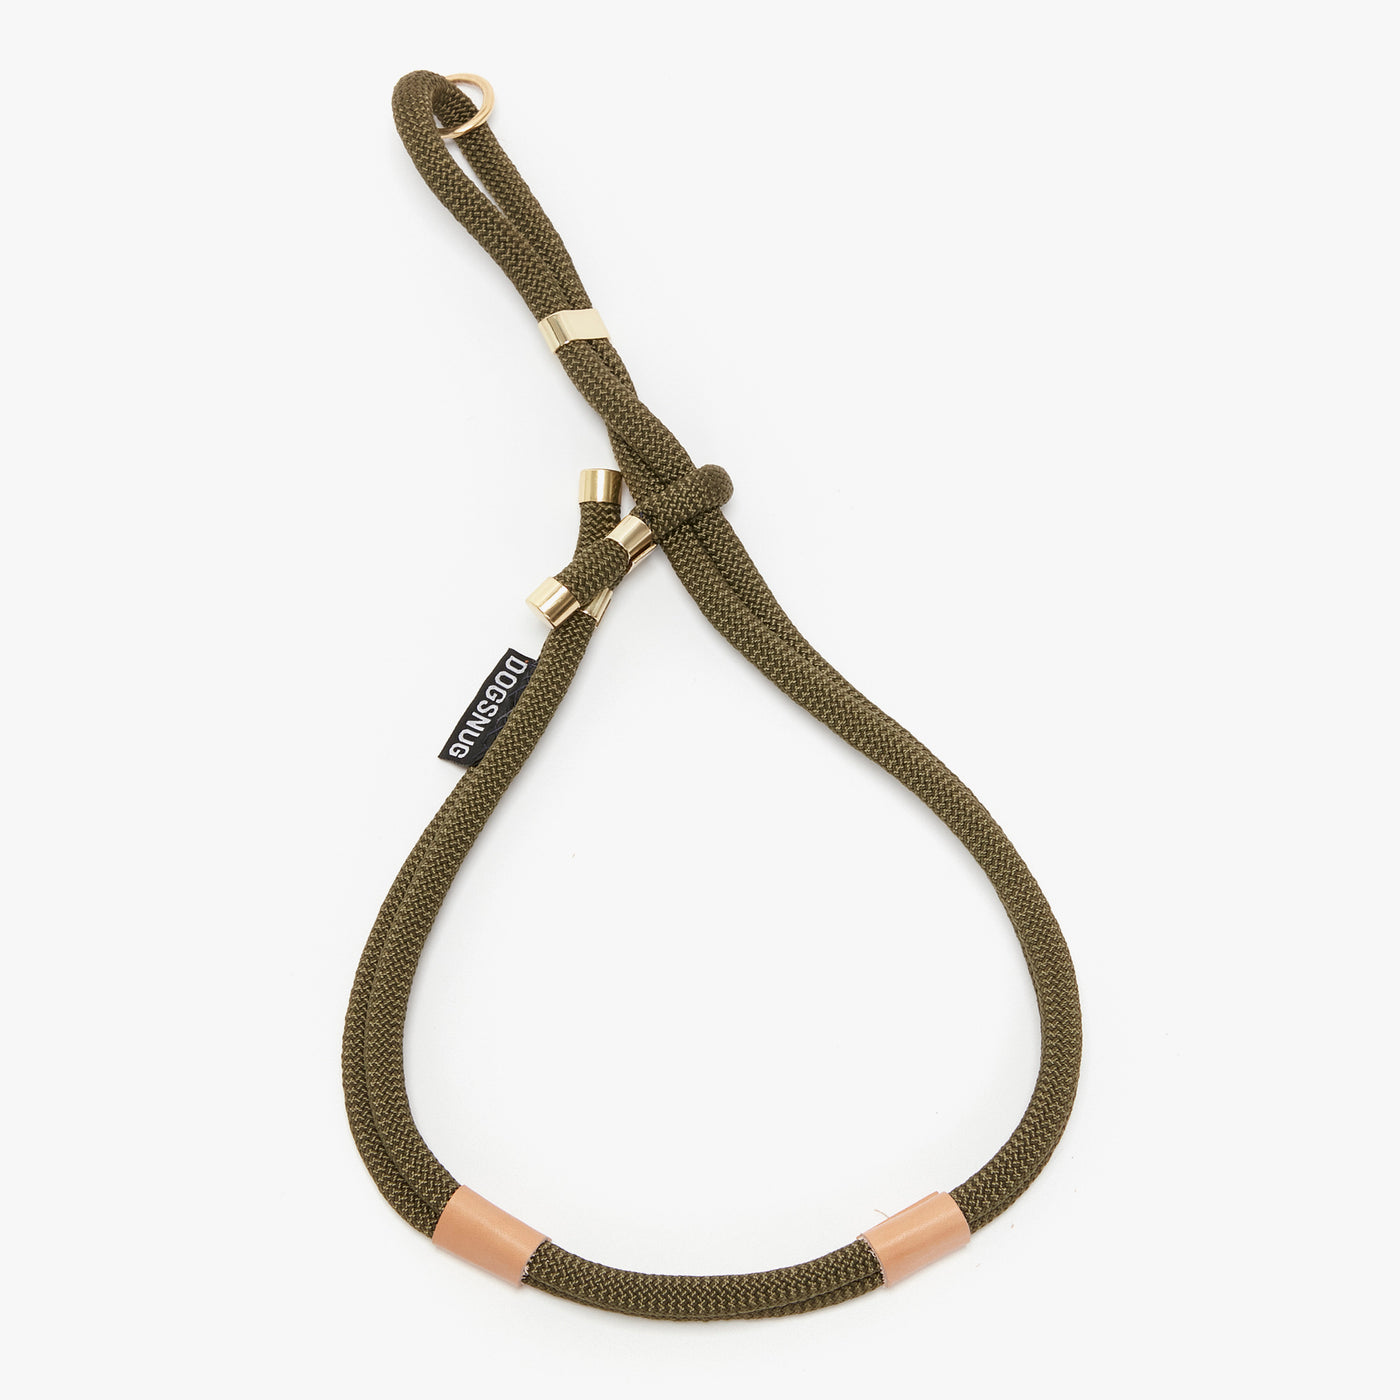 Dog rope harness in olive green